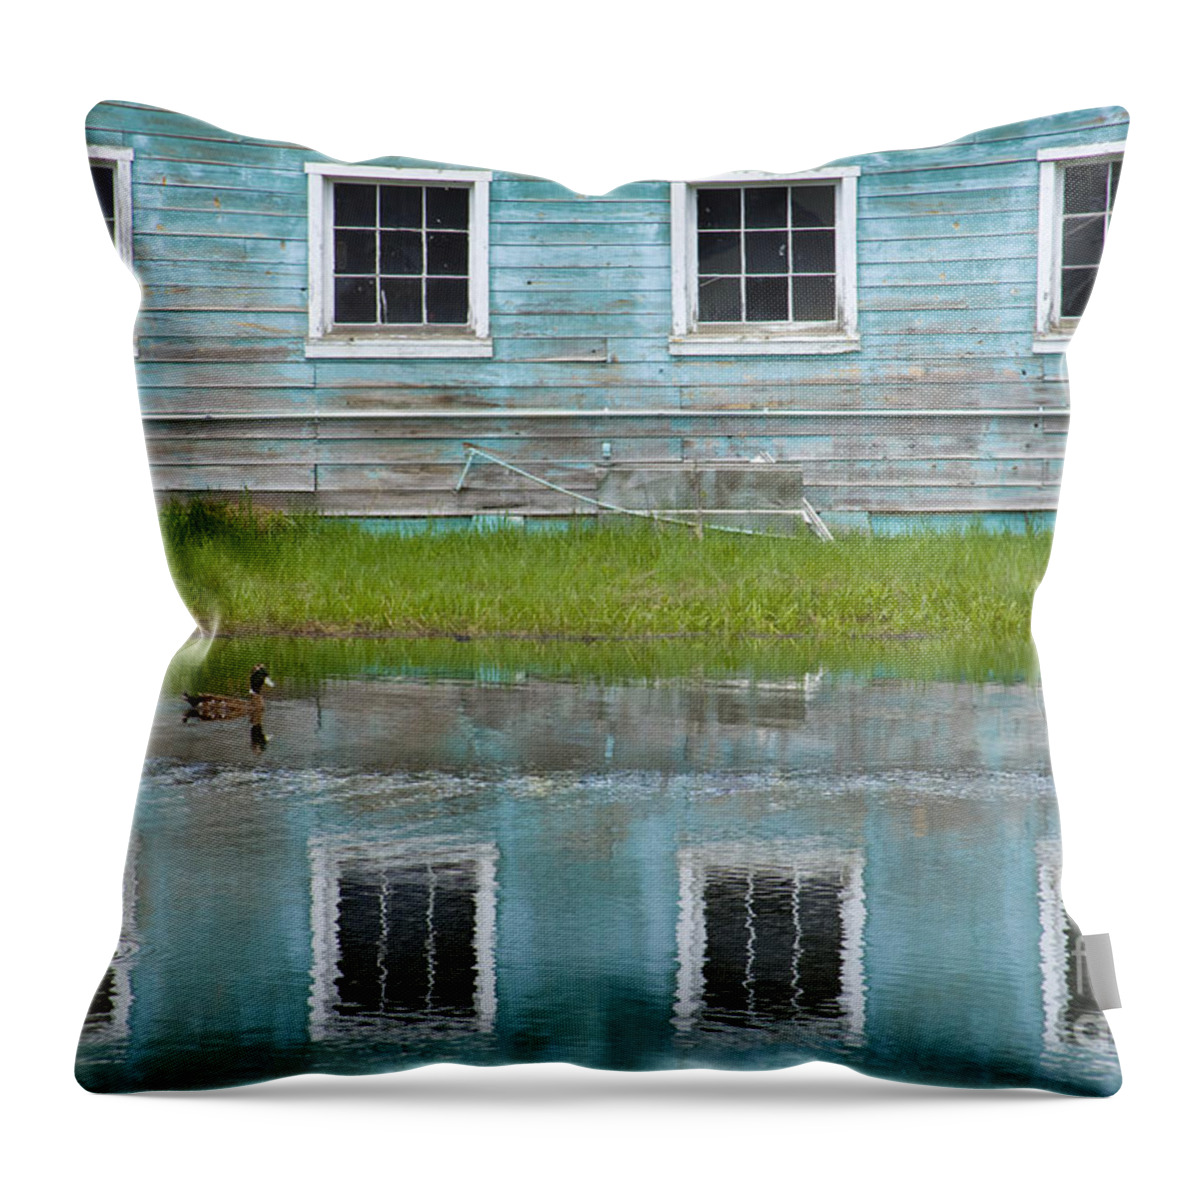 Windows Throw Pillow featuring the photograph Turquiose Illusion by Idaho Scenic Images Linda Lantzy